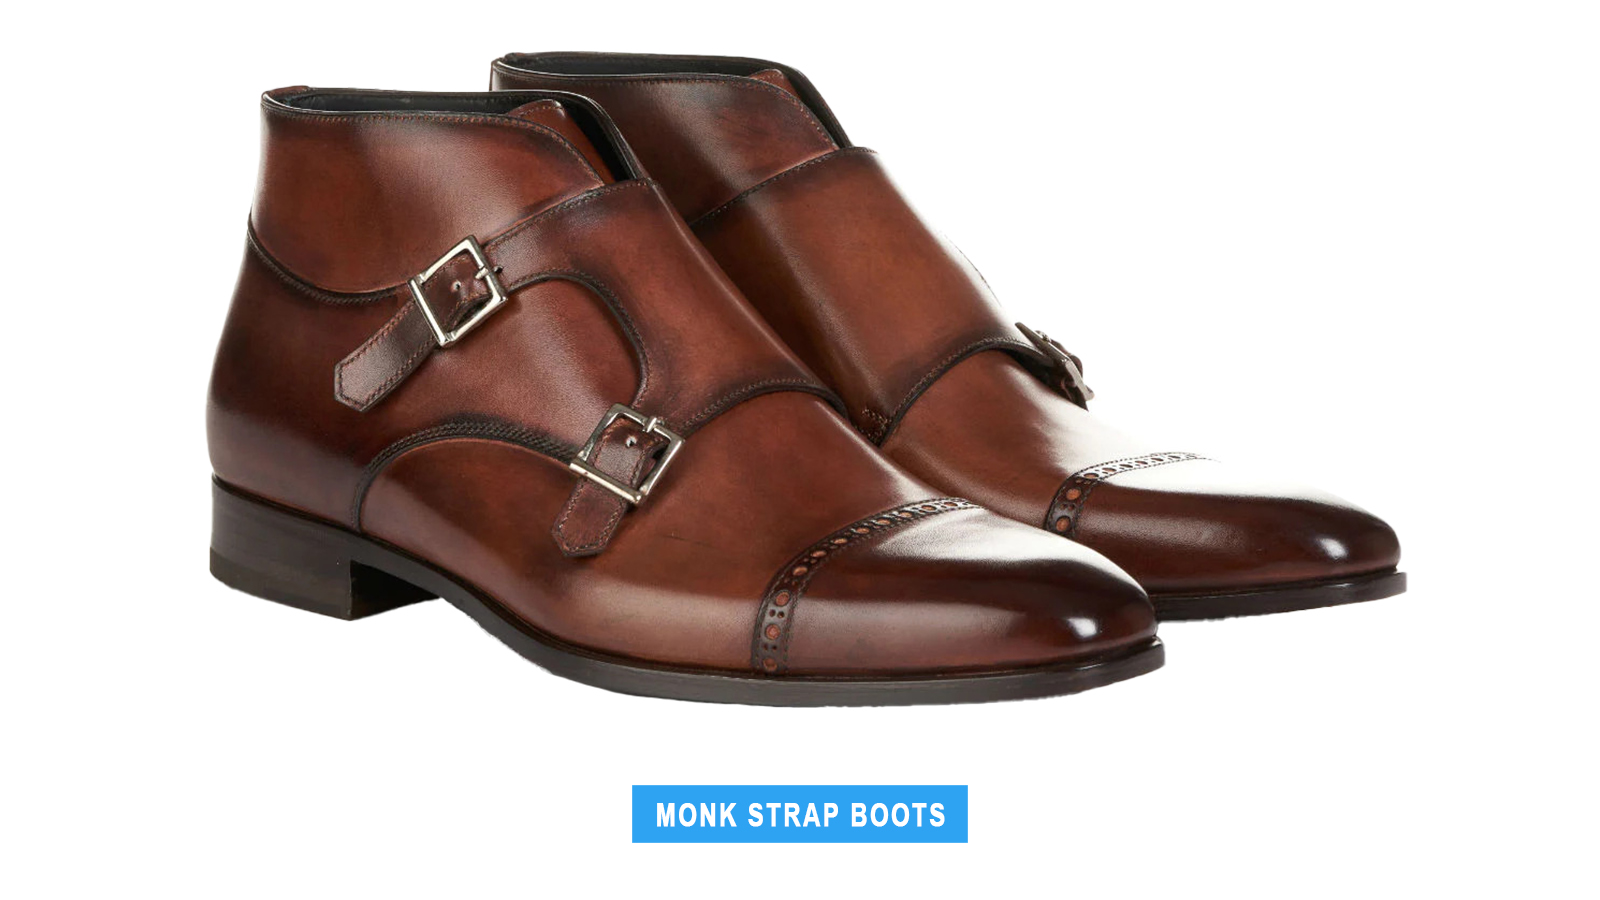 Monk strap boots style